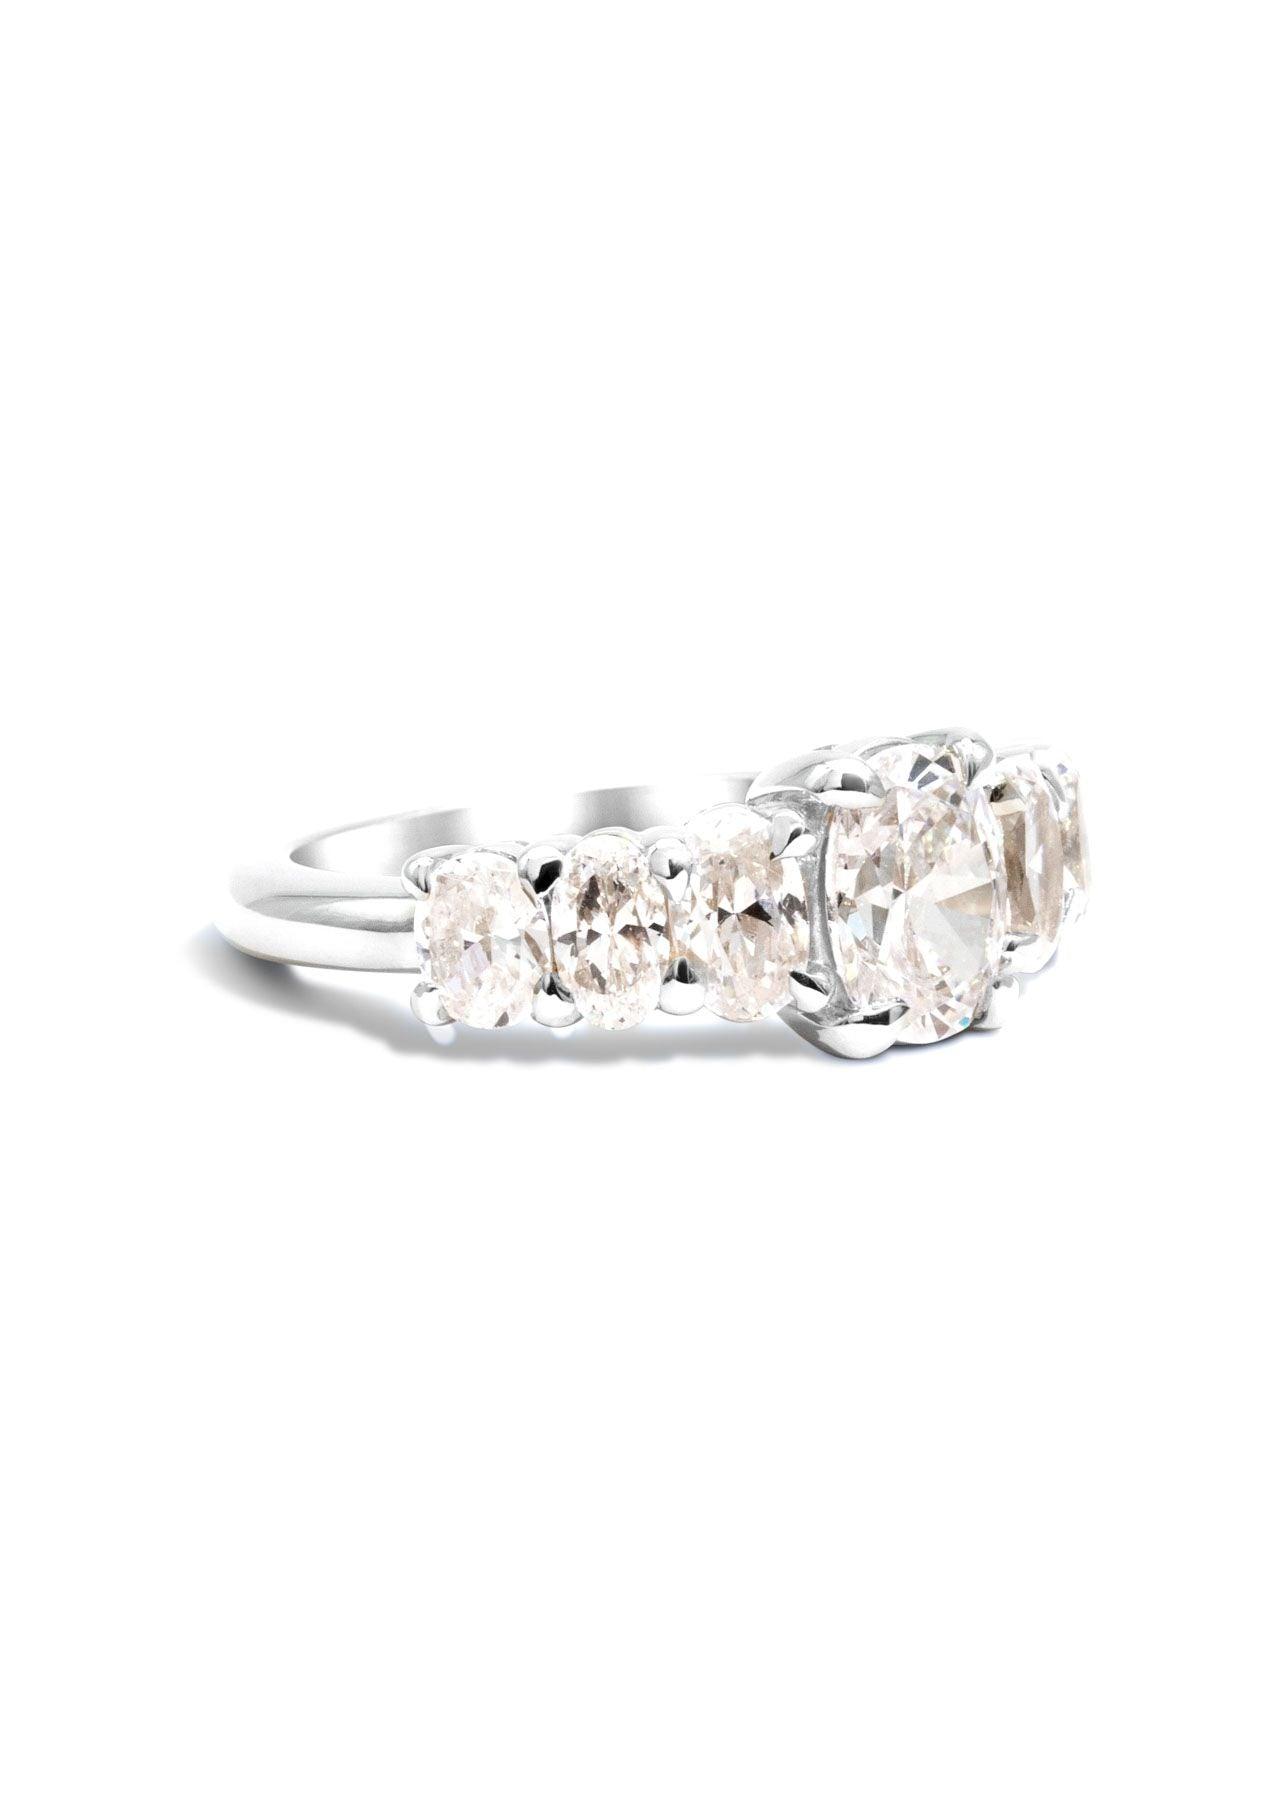 The Oval Banks White Gold Cultured Diamond Ring